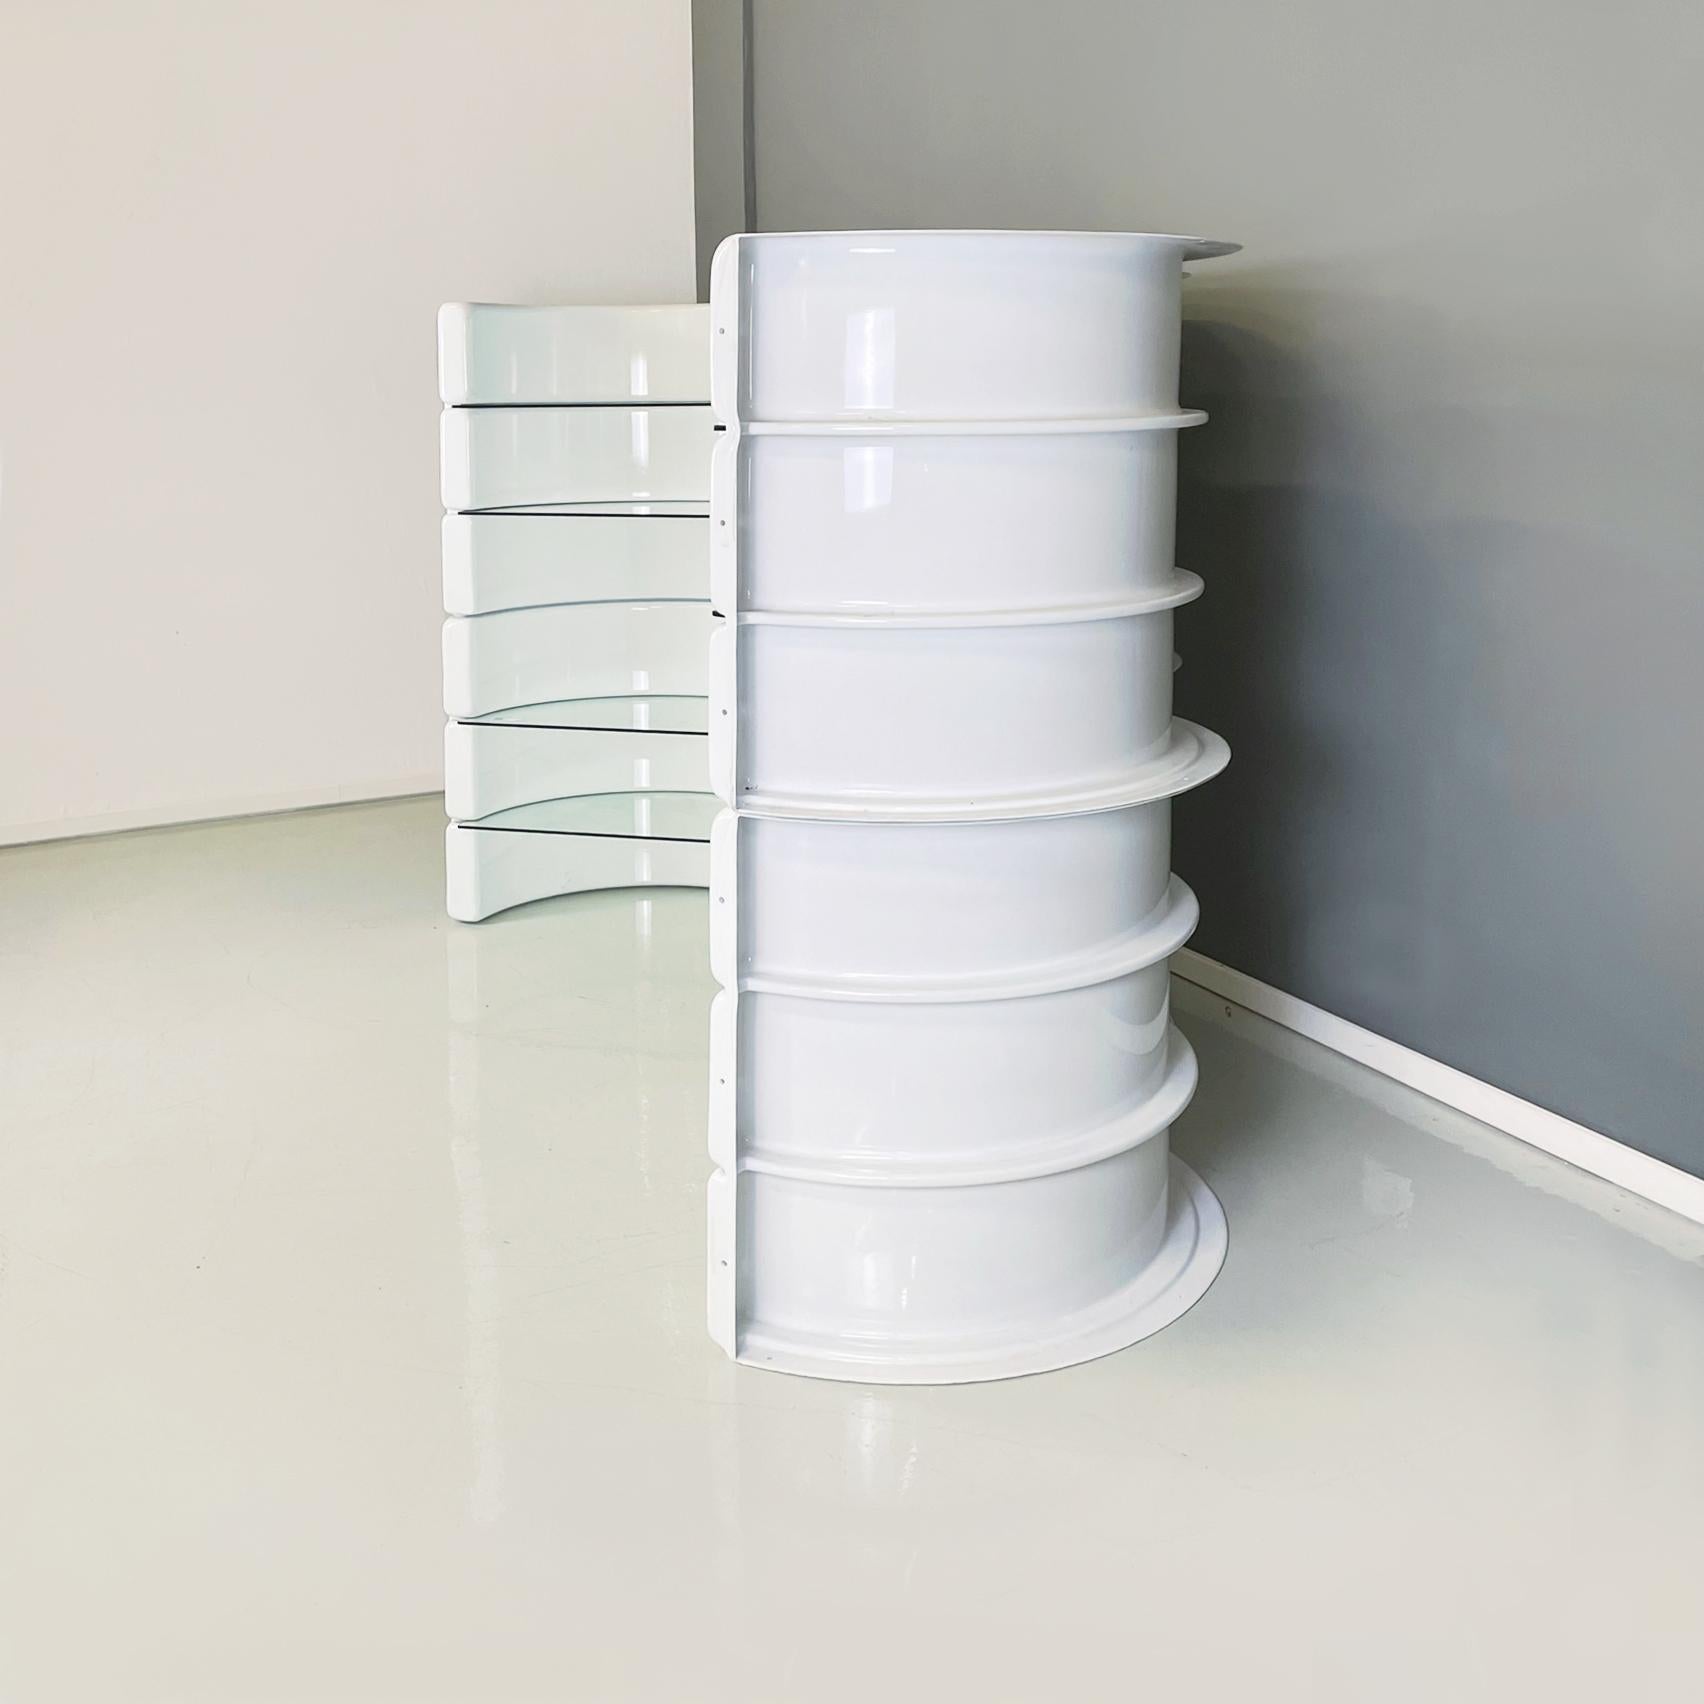 Italian space age Modular bookcase in white fiberglass and glass by Astrarte, 1970s
Modular bookcase with semi-cylinder structure in white fiberglass. The bookcase is made up of 6 modules, which can be positioned as desired (in the photo 2 modules